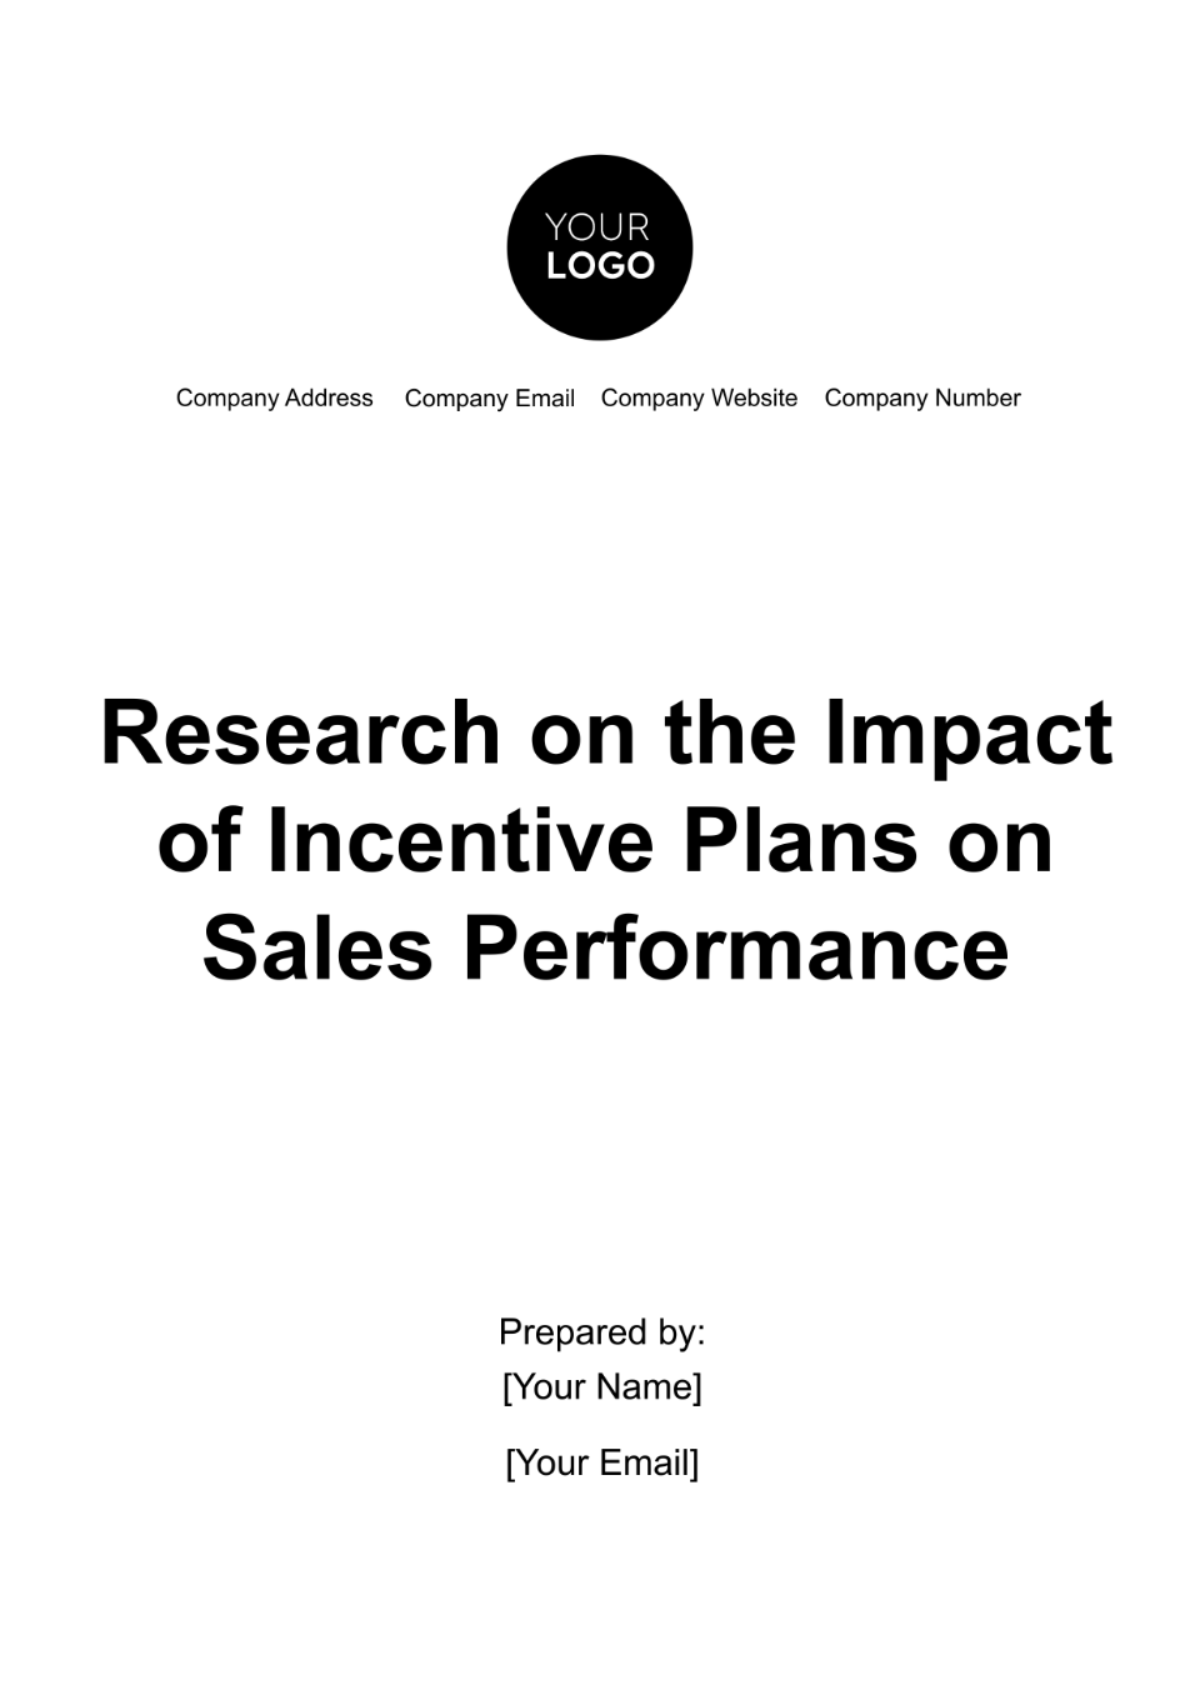 Research on the Impact of Incentive Plans on Sales Performance Template